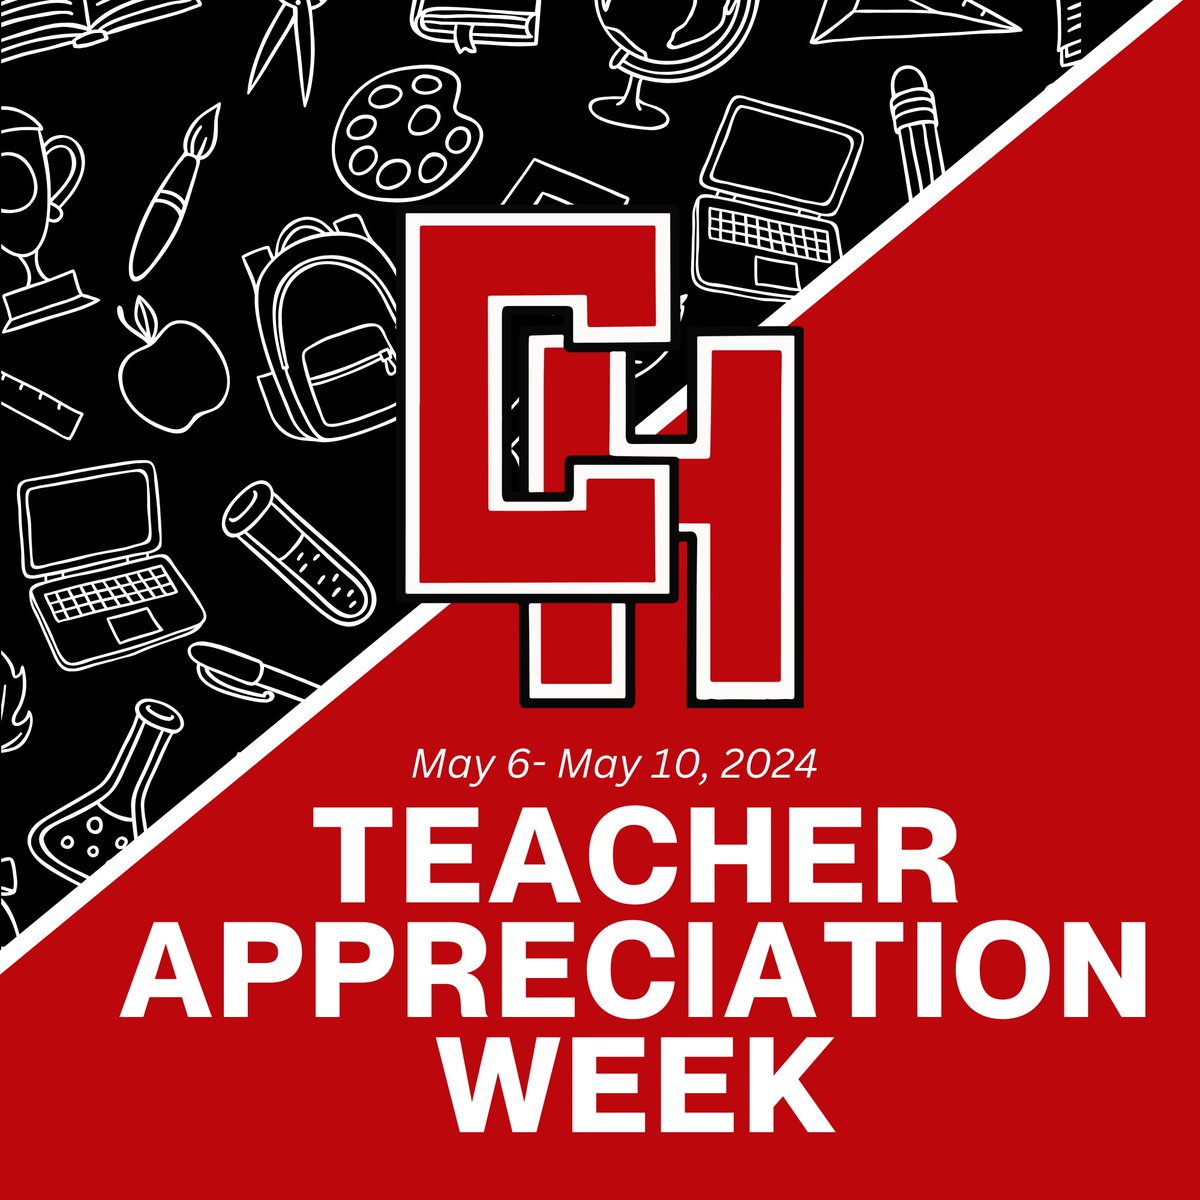 Our teachers work tirelessly to inspire & educate our students. Thank you for your dedication, creativity, & caring approach! You make a lasting impact on our community. #TeacherAppreciationWeek